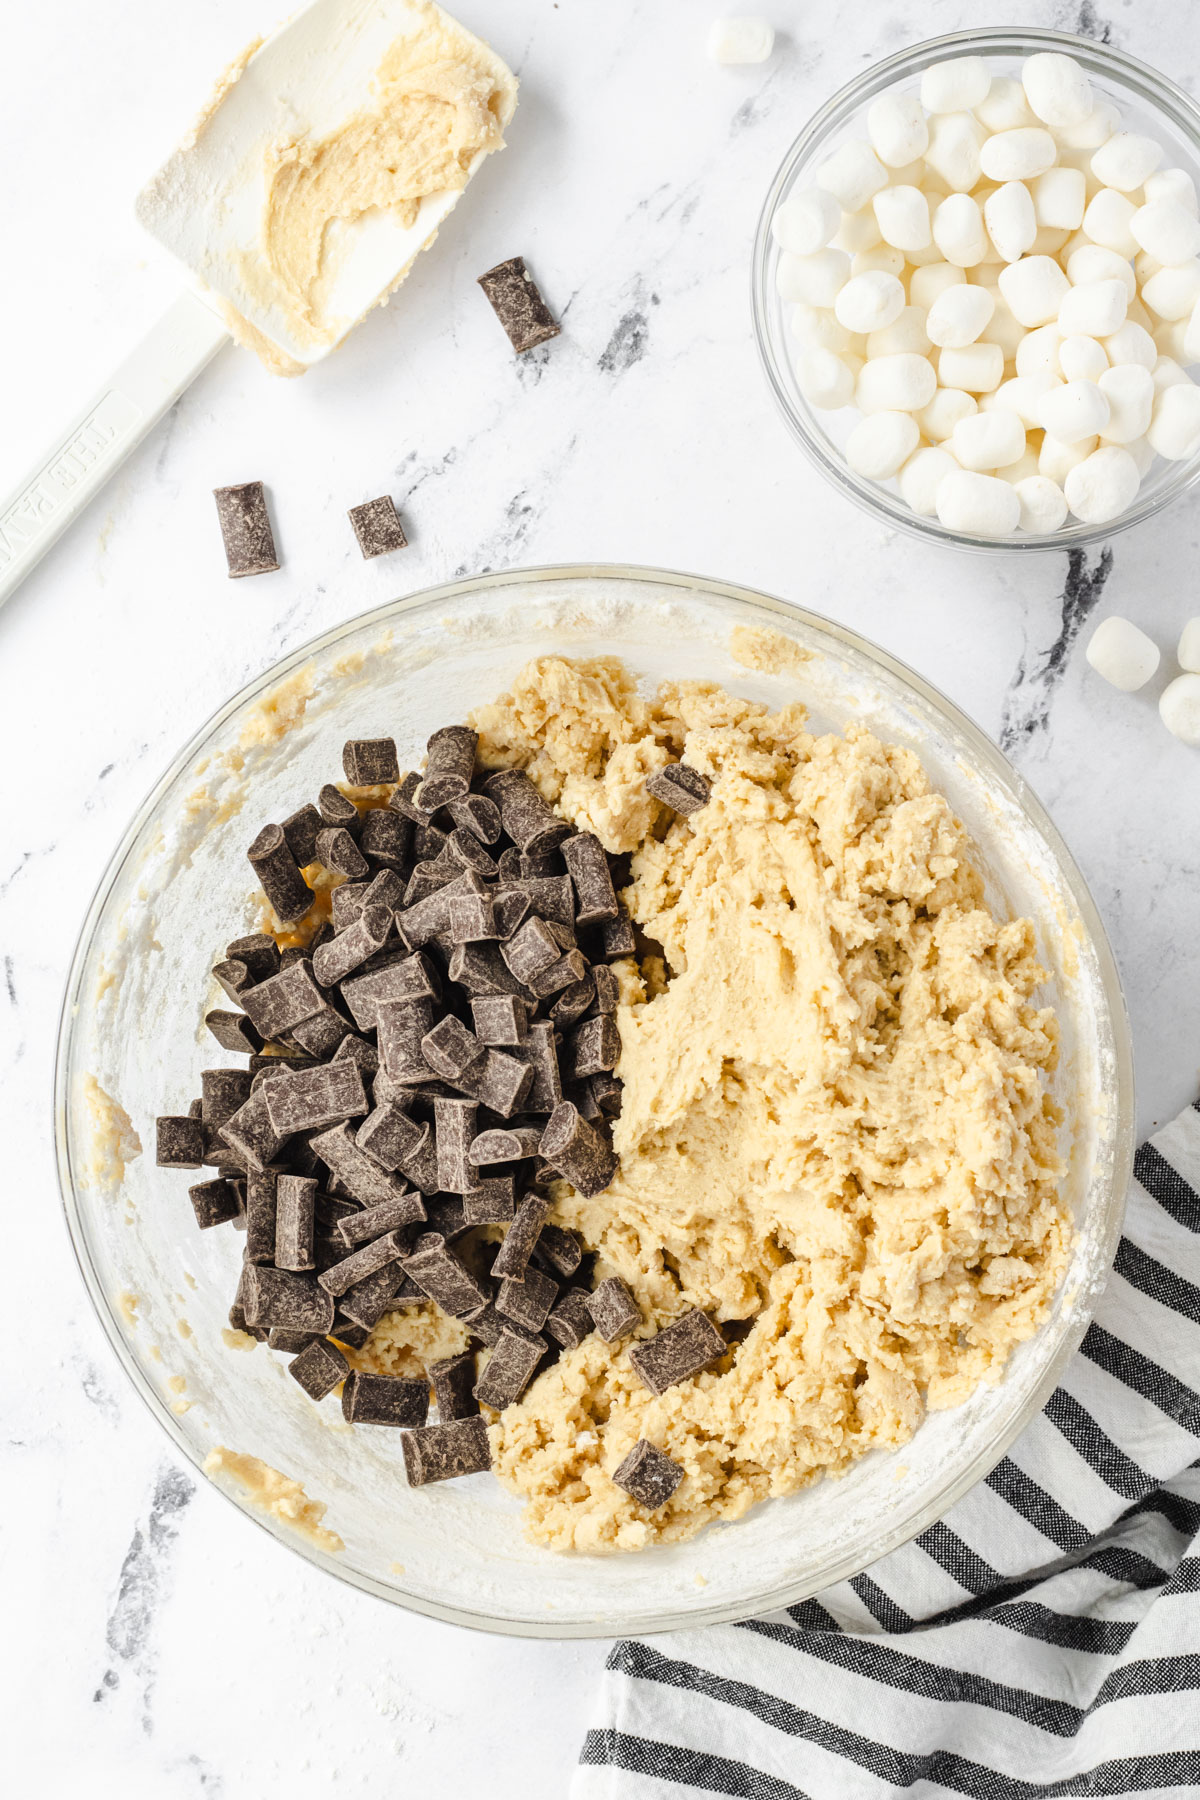 Cookie dough with chocolate chips added, and a bowl of marshmallows next to it.